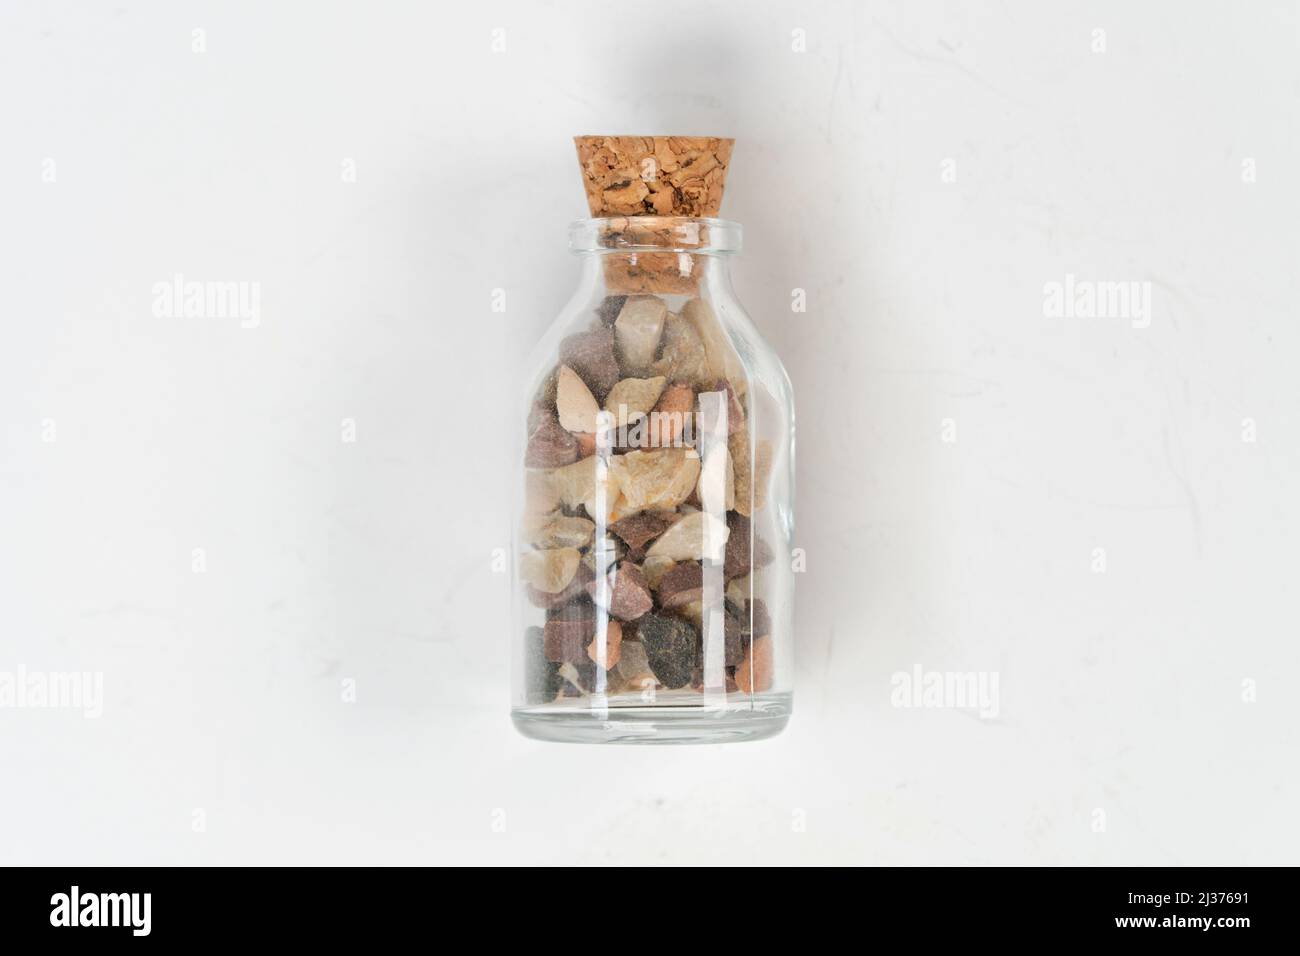 Small rocks in glass bottle with cork stopper isolated on white background, for remembrance, broken sand stones in glass bottle, saving memory on jar, Stock Photo